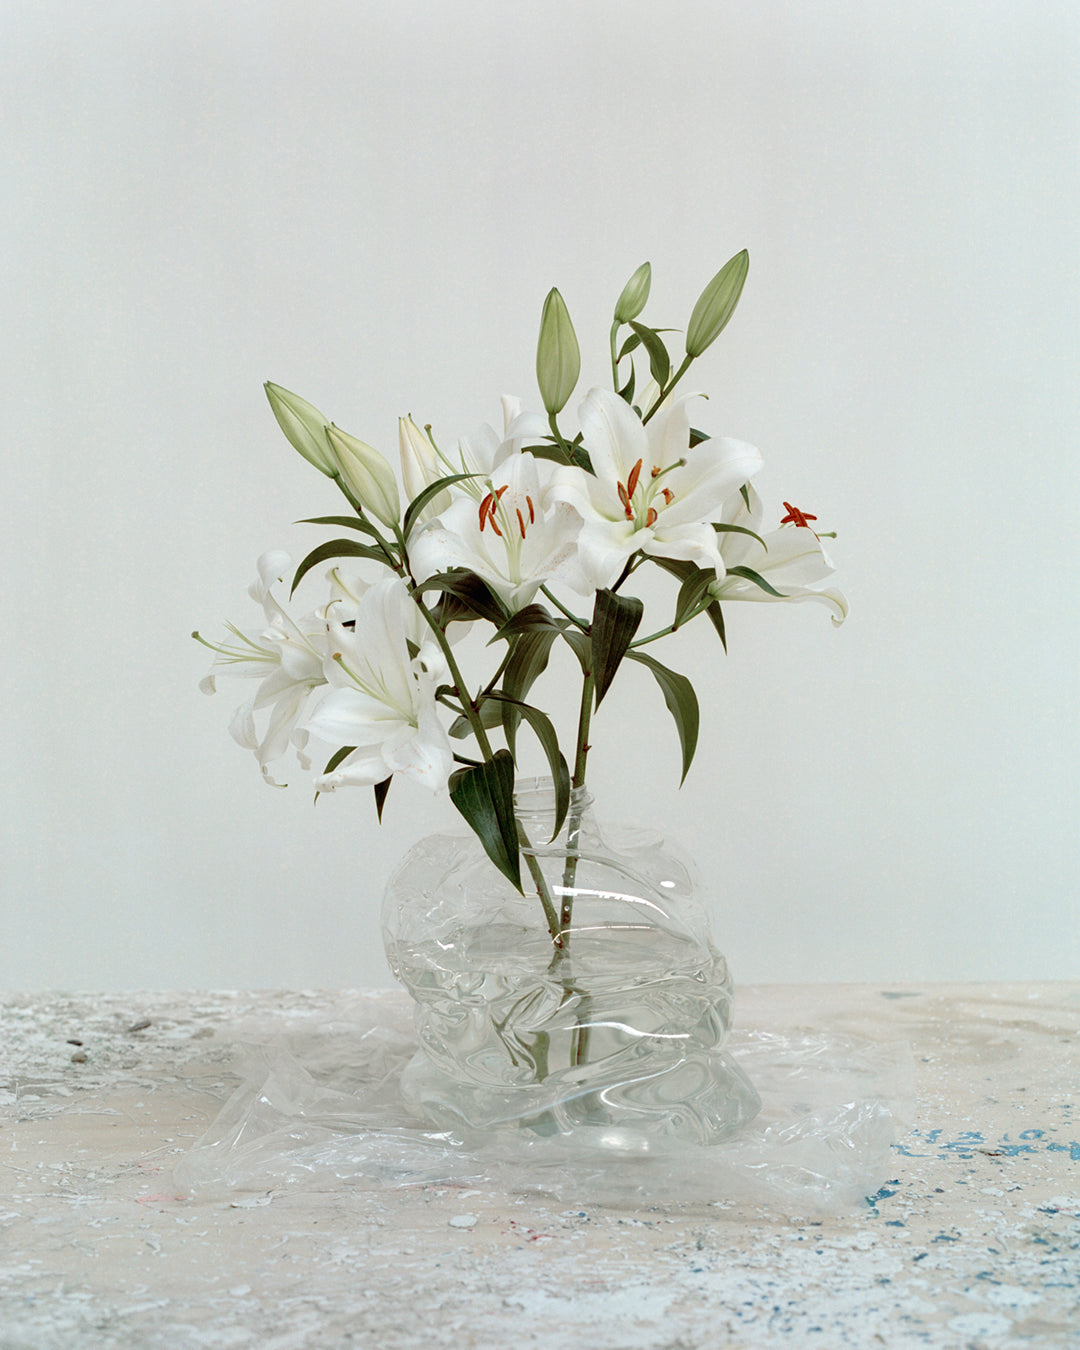 White background, transparent  handmade recycled plastic vase with white lilies